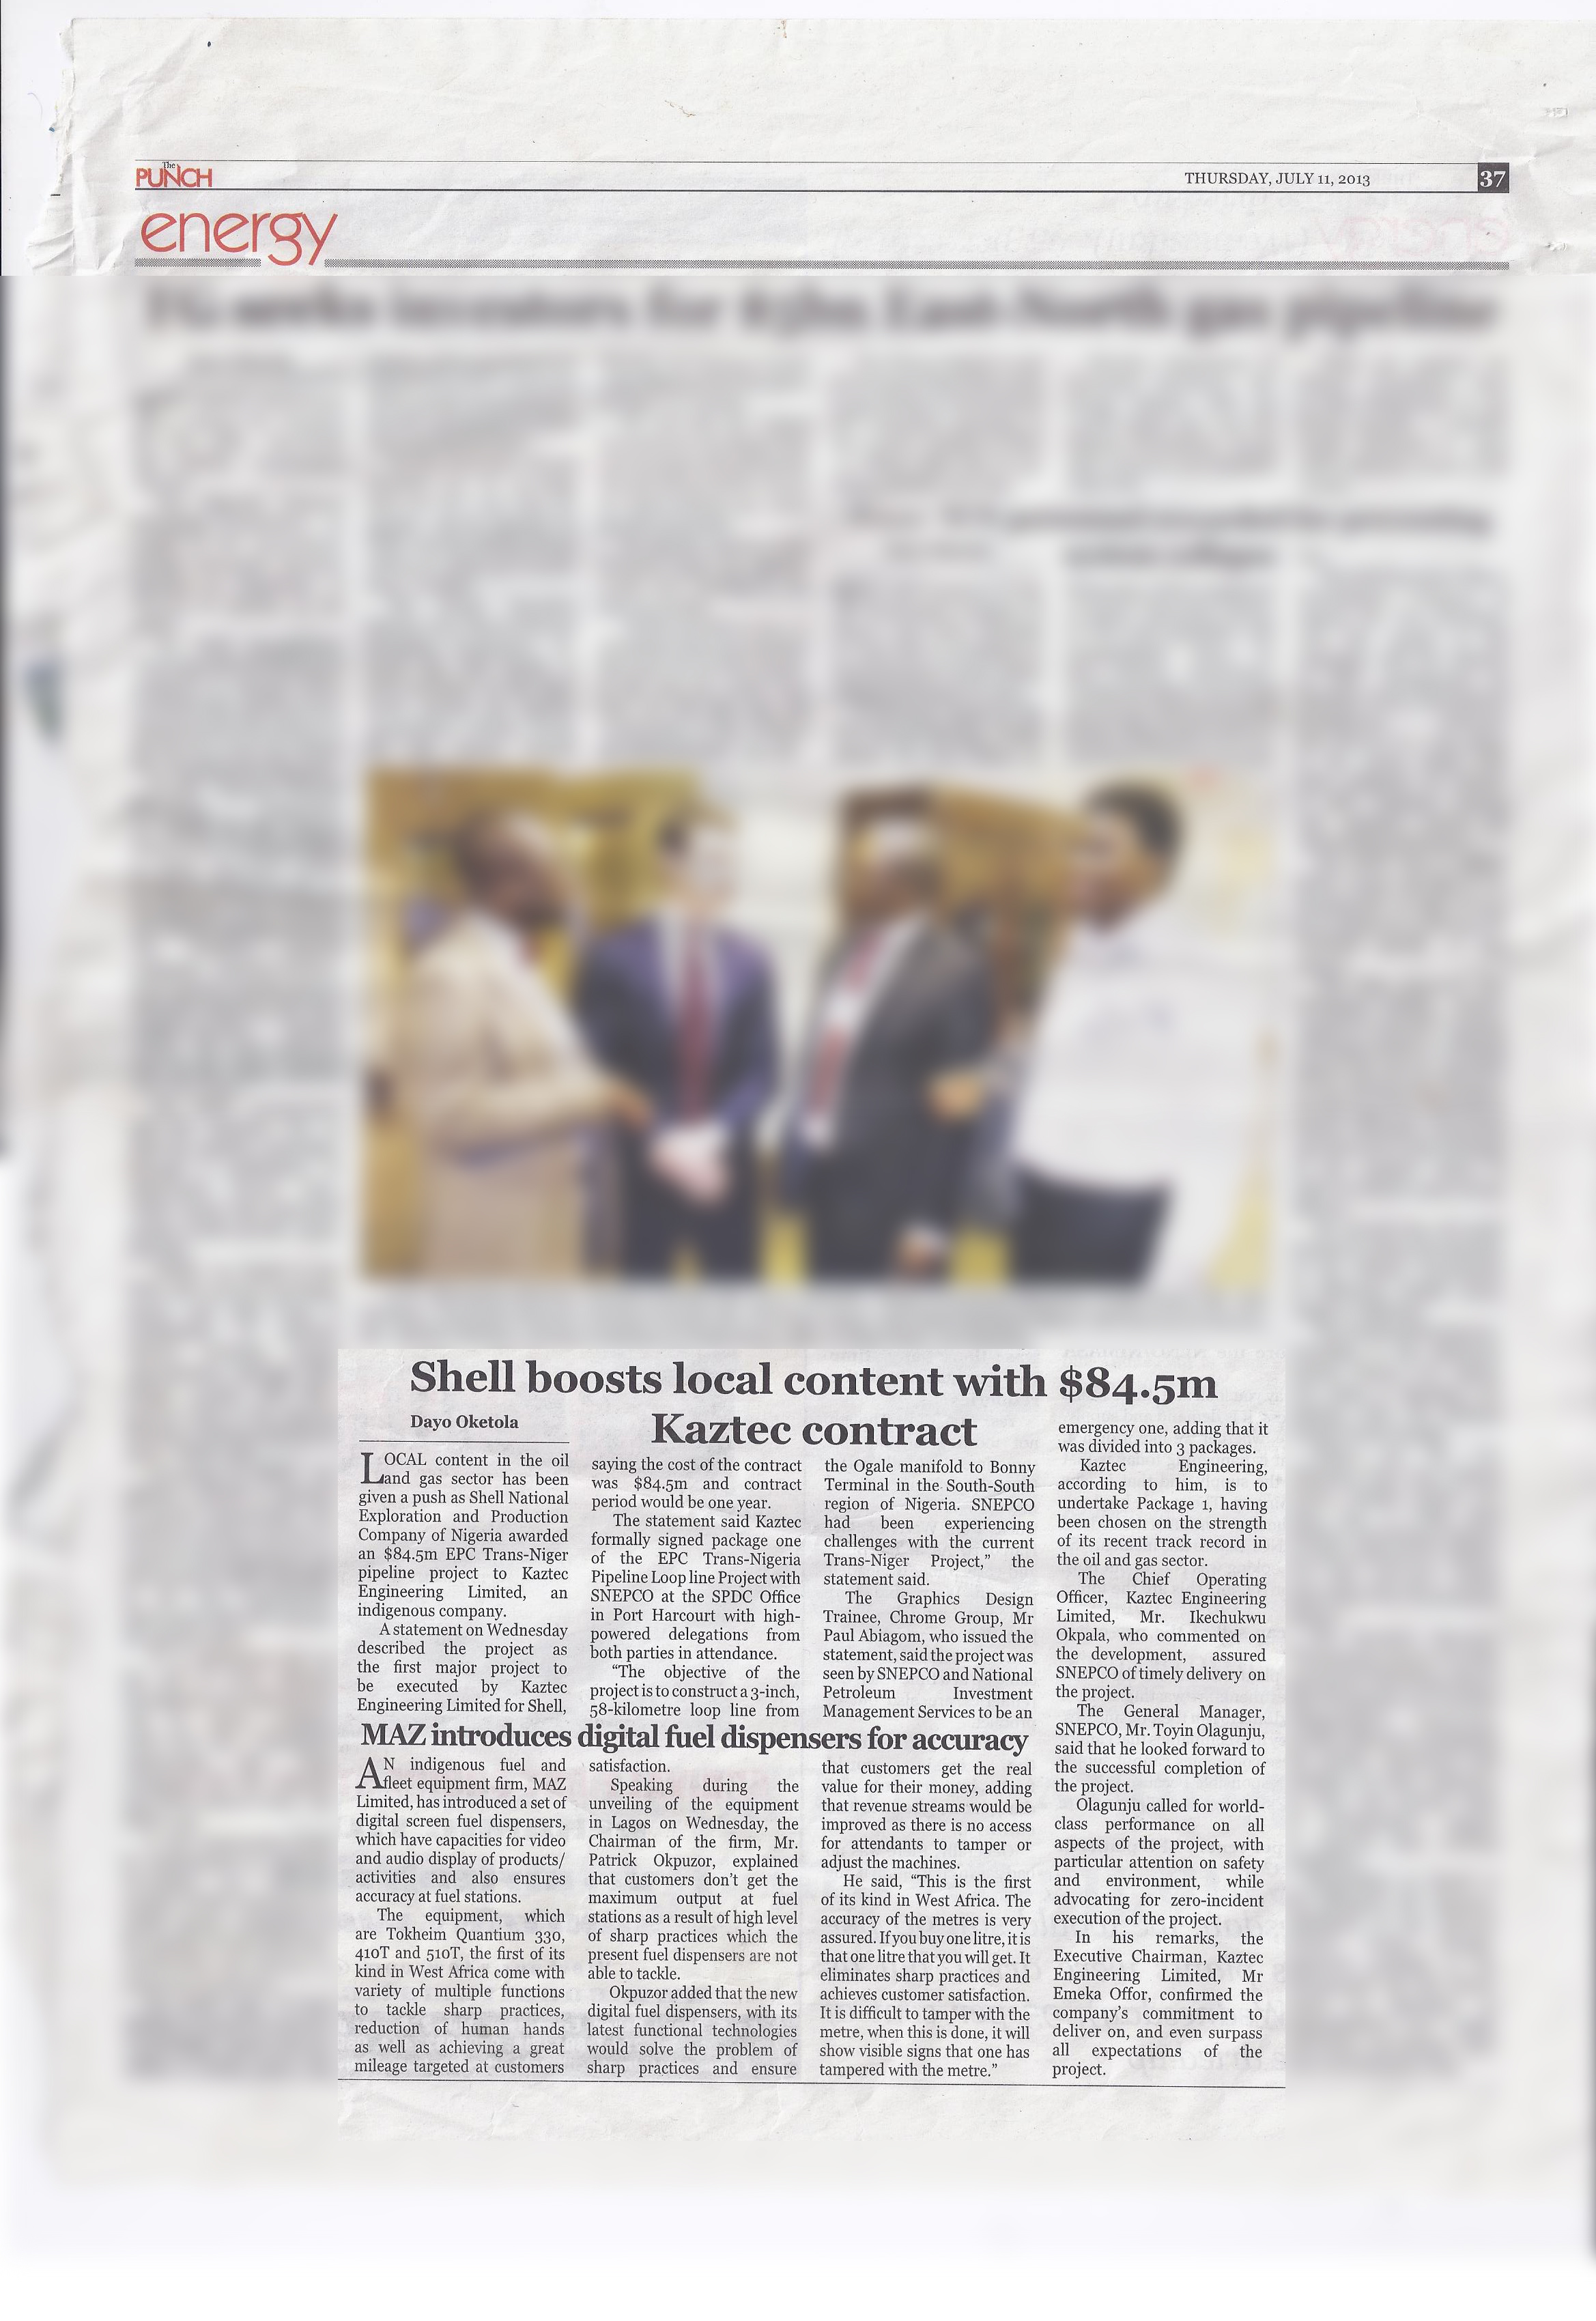 The Punch: Shell boosts local content with US$84.5m Kaztec contract